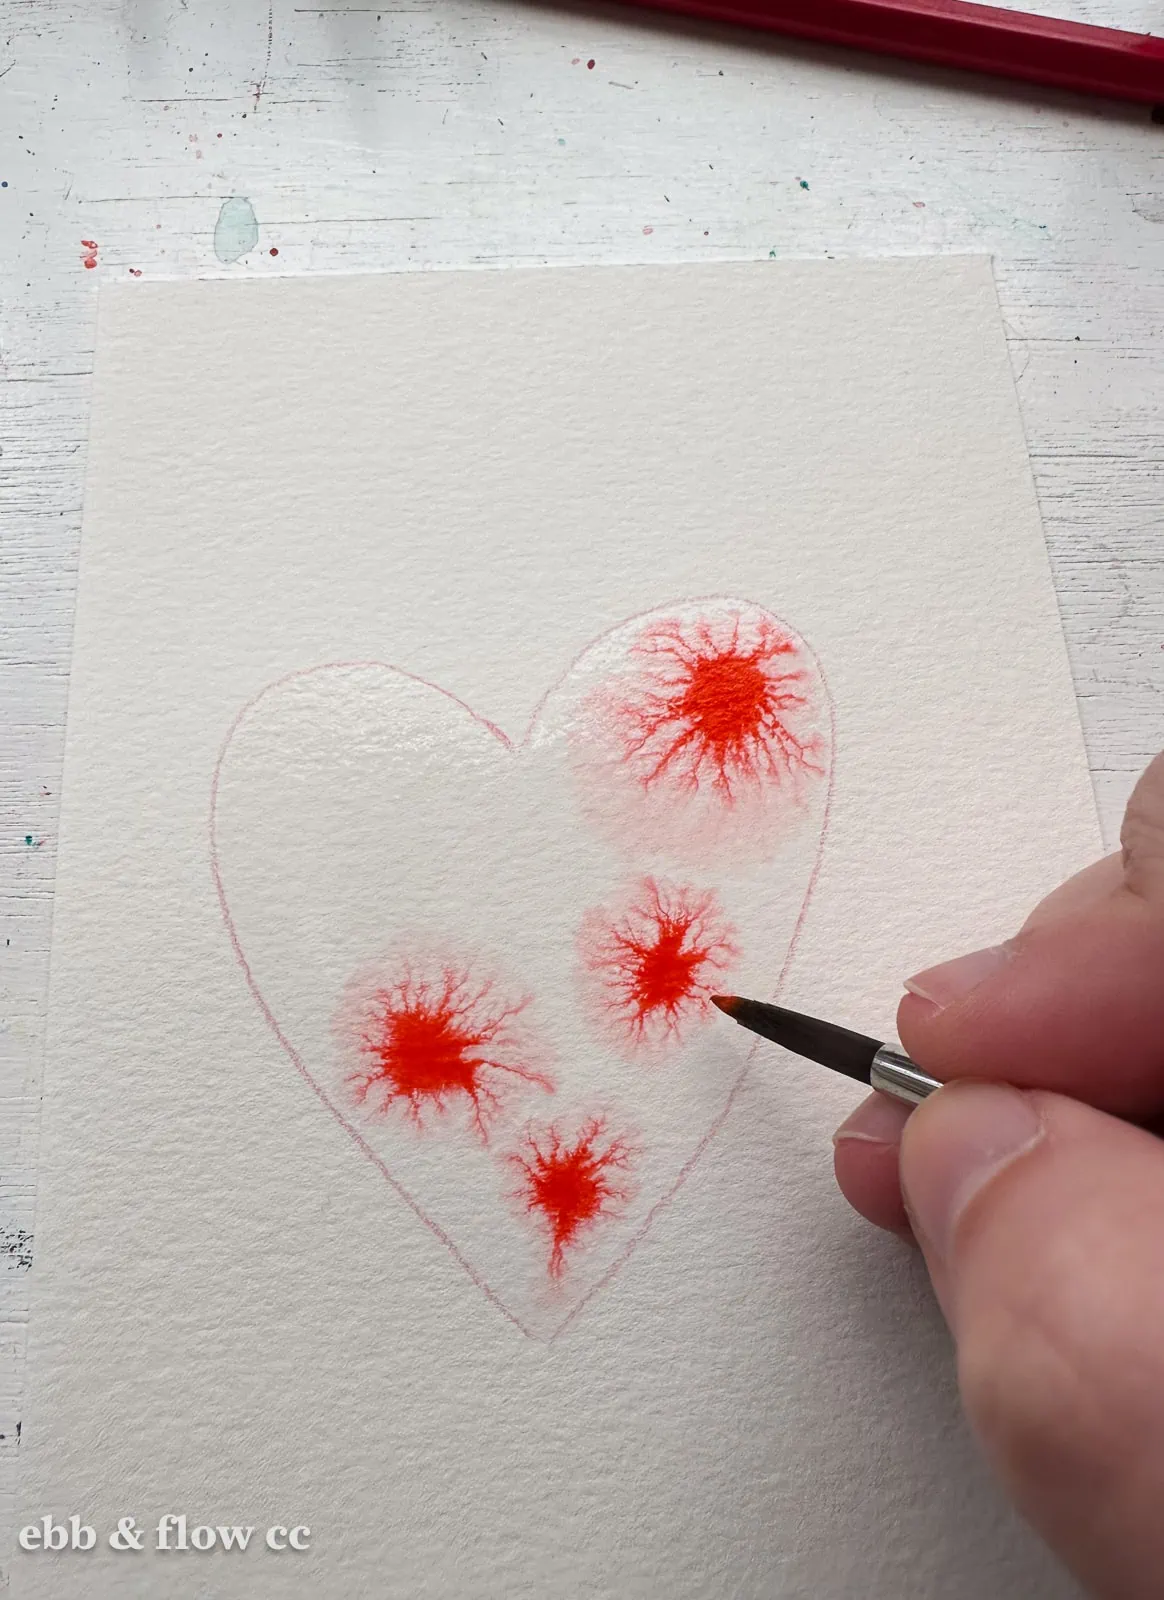 dropping paint into water shape on paper